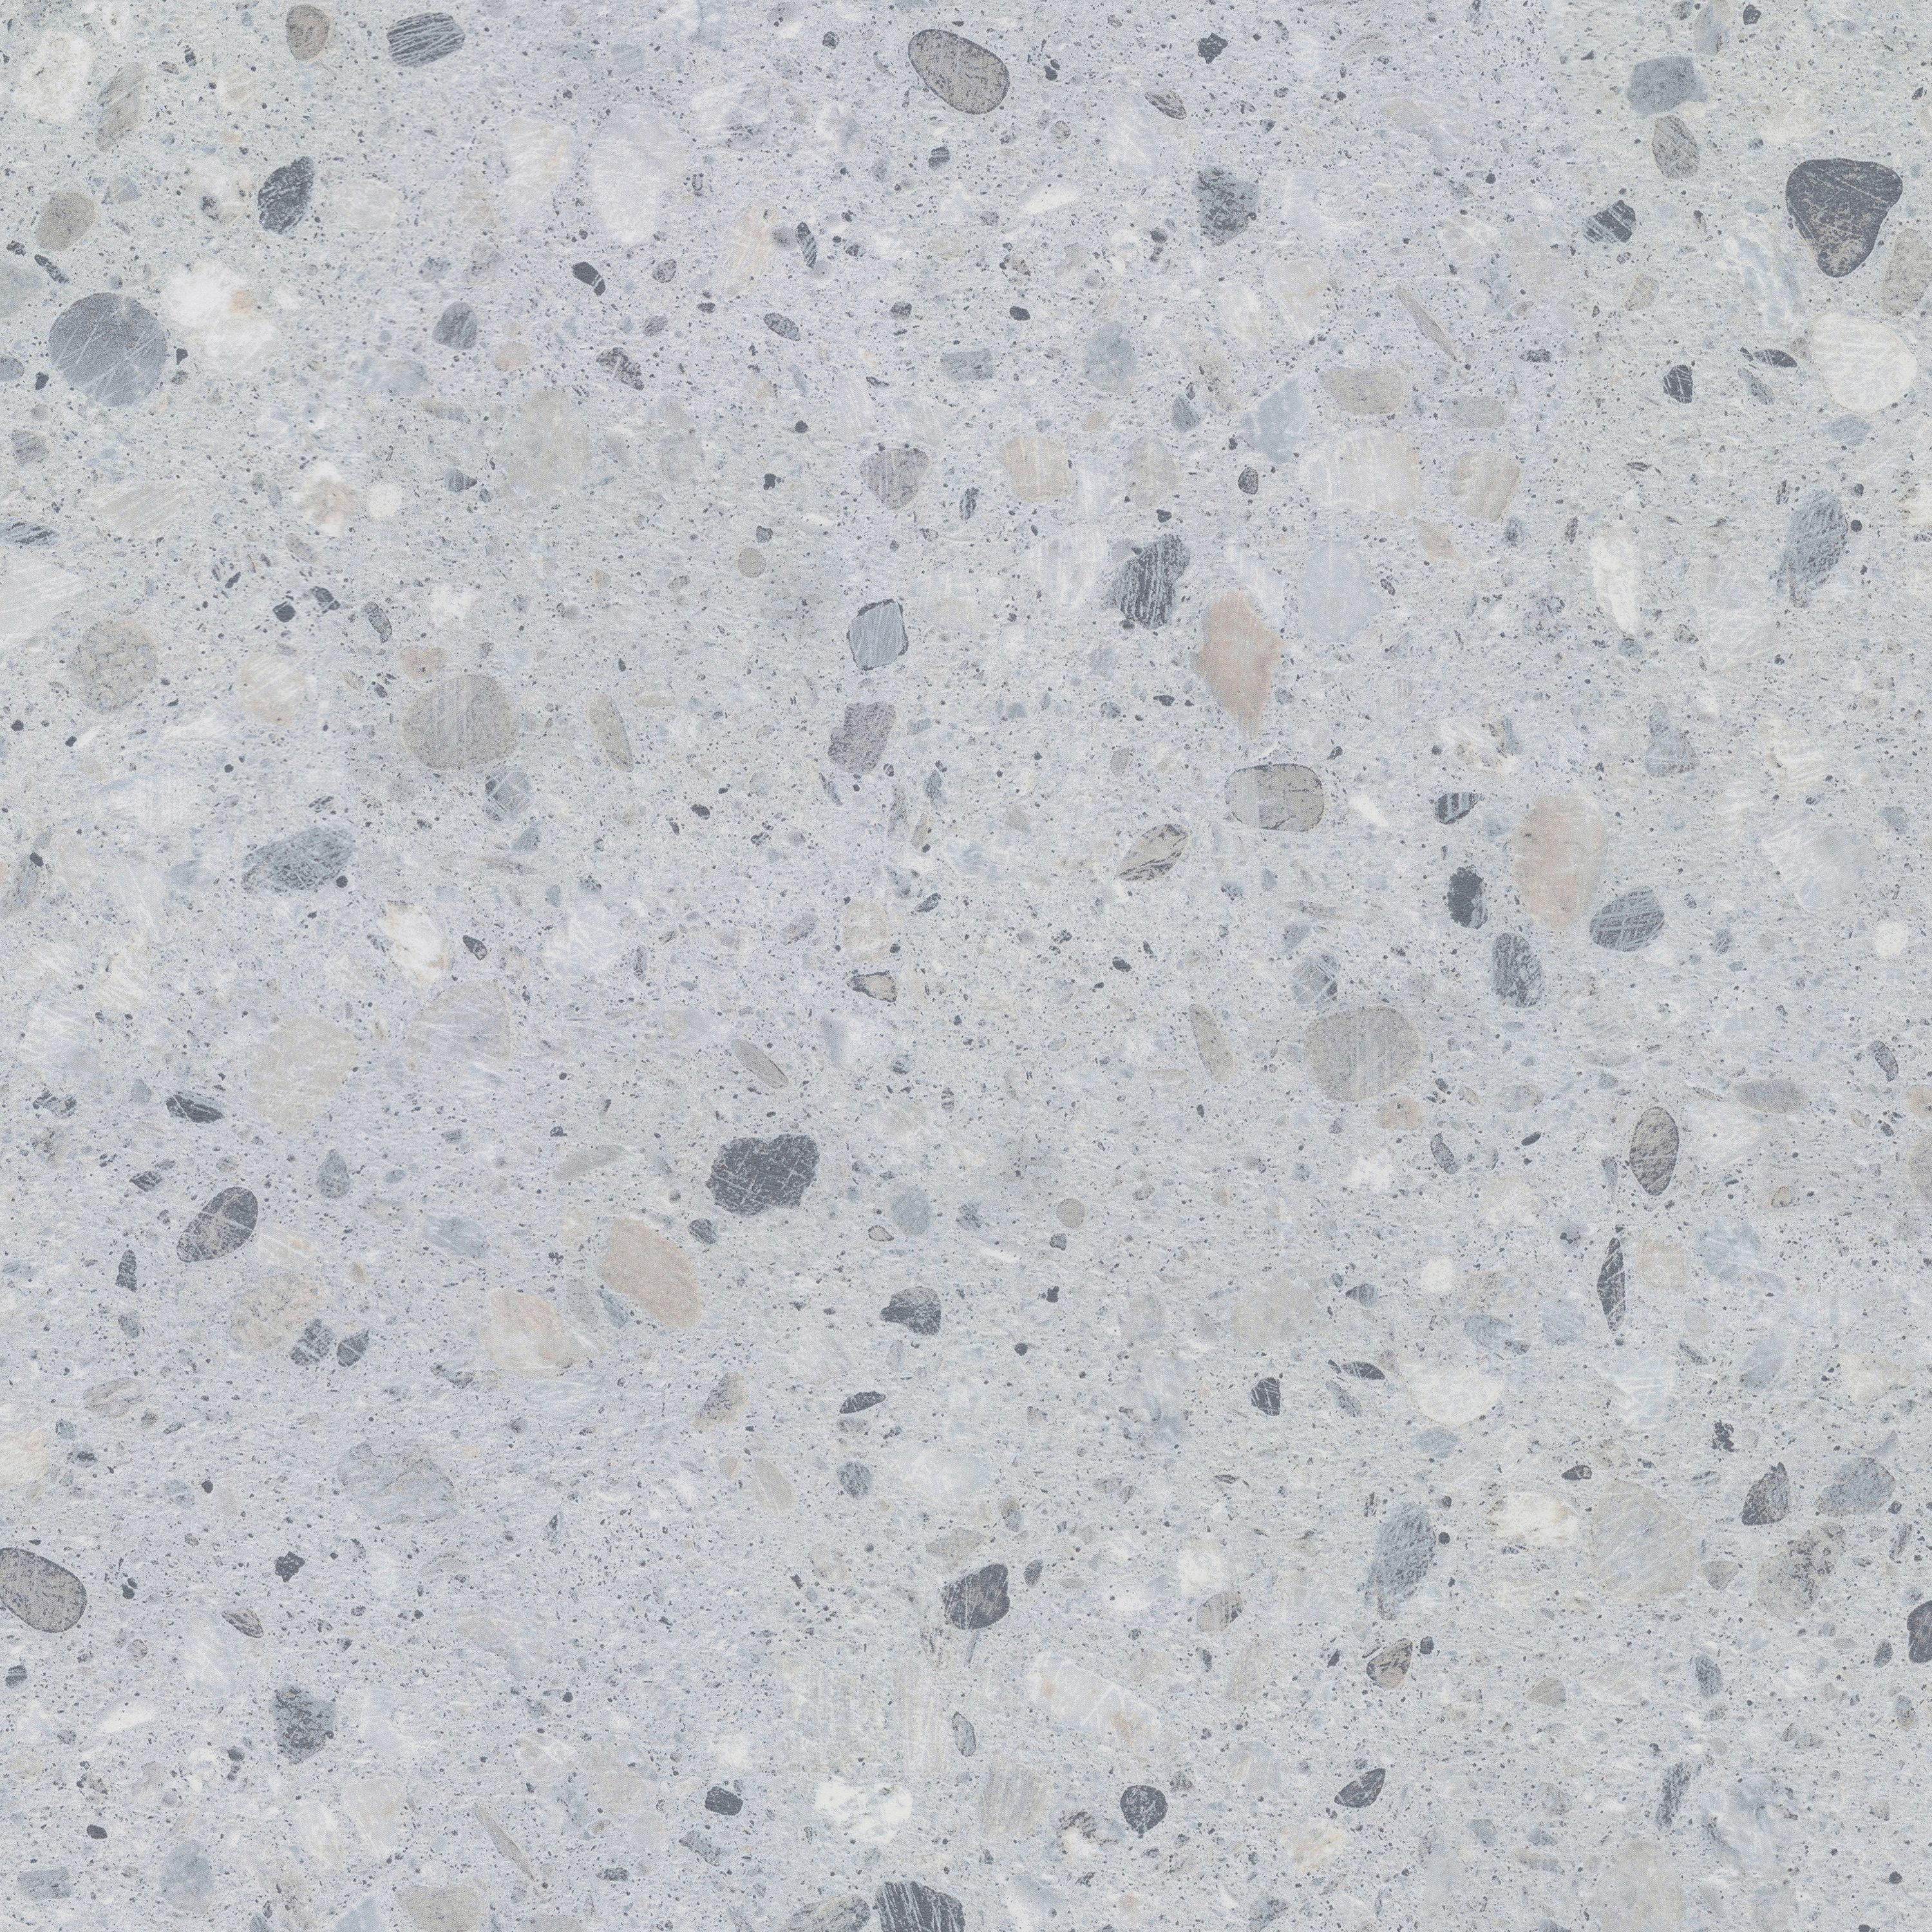 GoodHome Algiata Polished Grey Terrazzo effect Laminated chipboard Back panel, (H)8mm (W)600mm (T)8mm